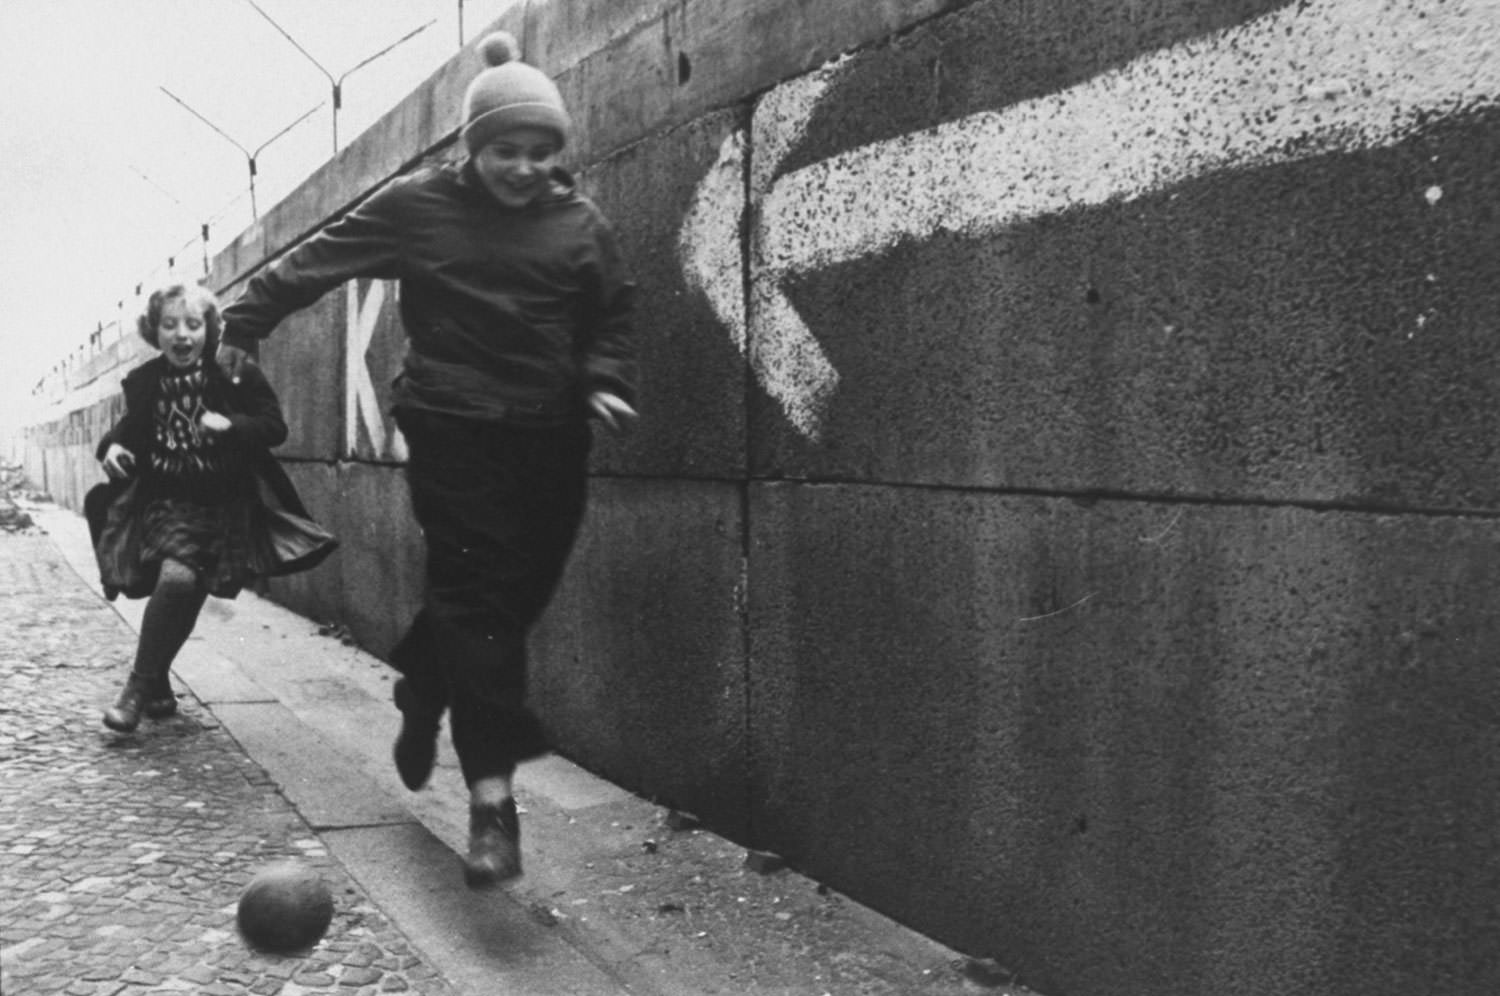 Children chase a ball beside the Berlin Wall in December 1962.